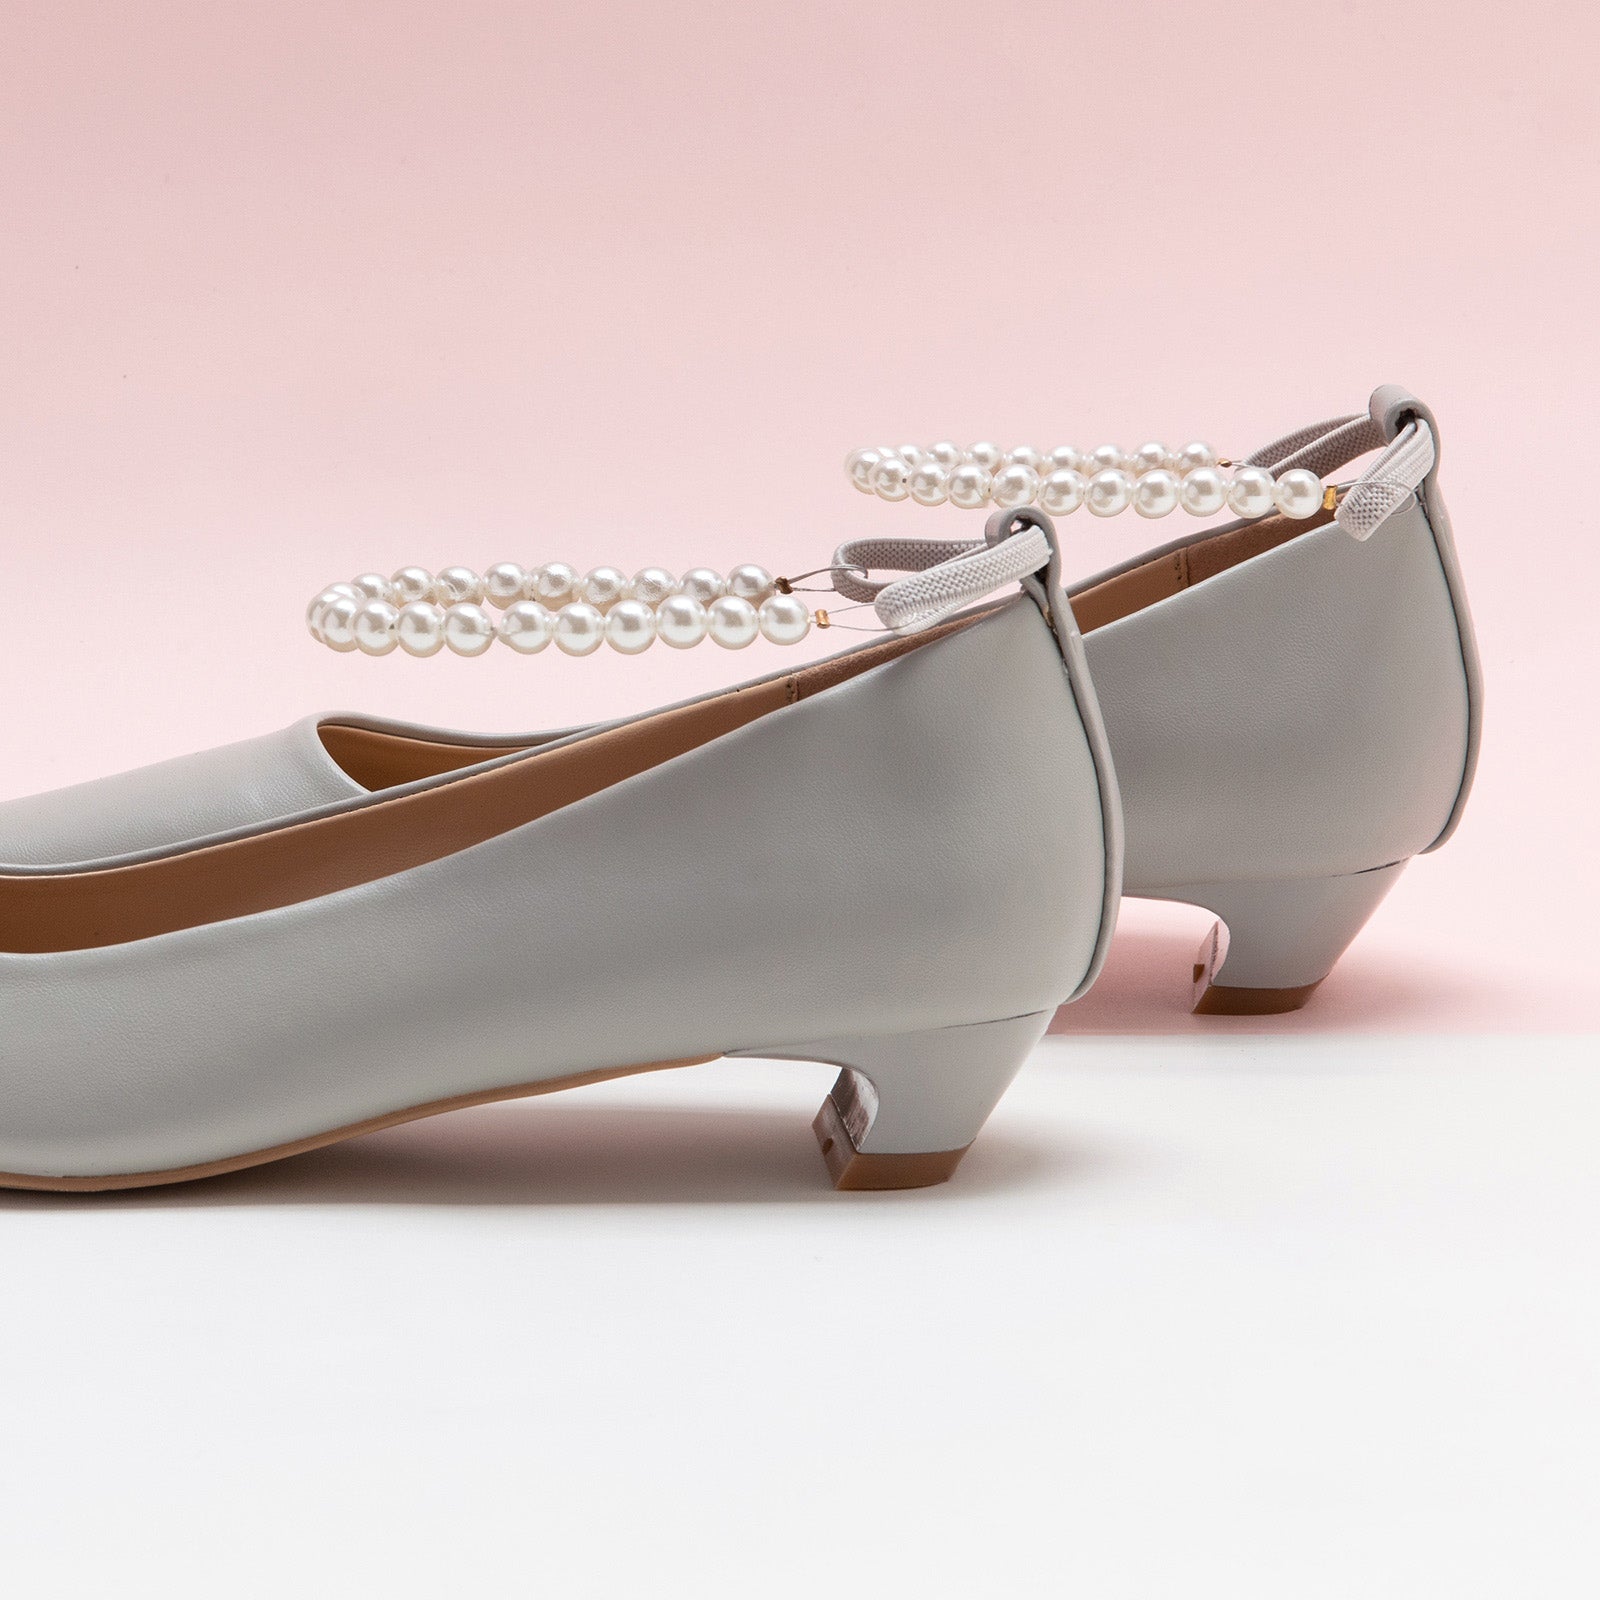 Pearl Straps Low Heel in Grey, adding a touch of modernity and style to your everyday look